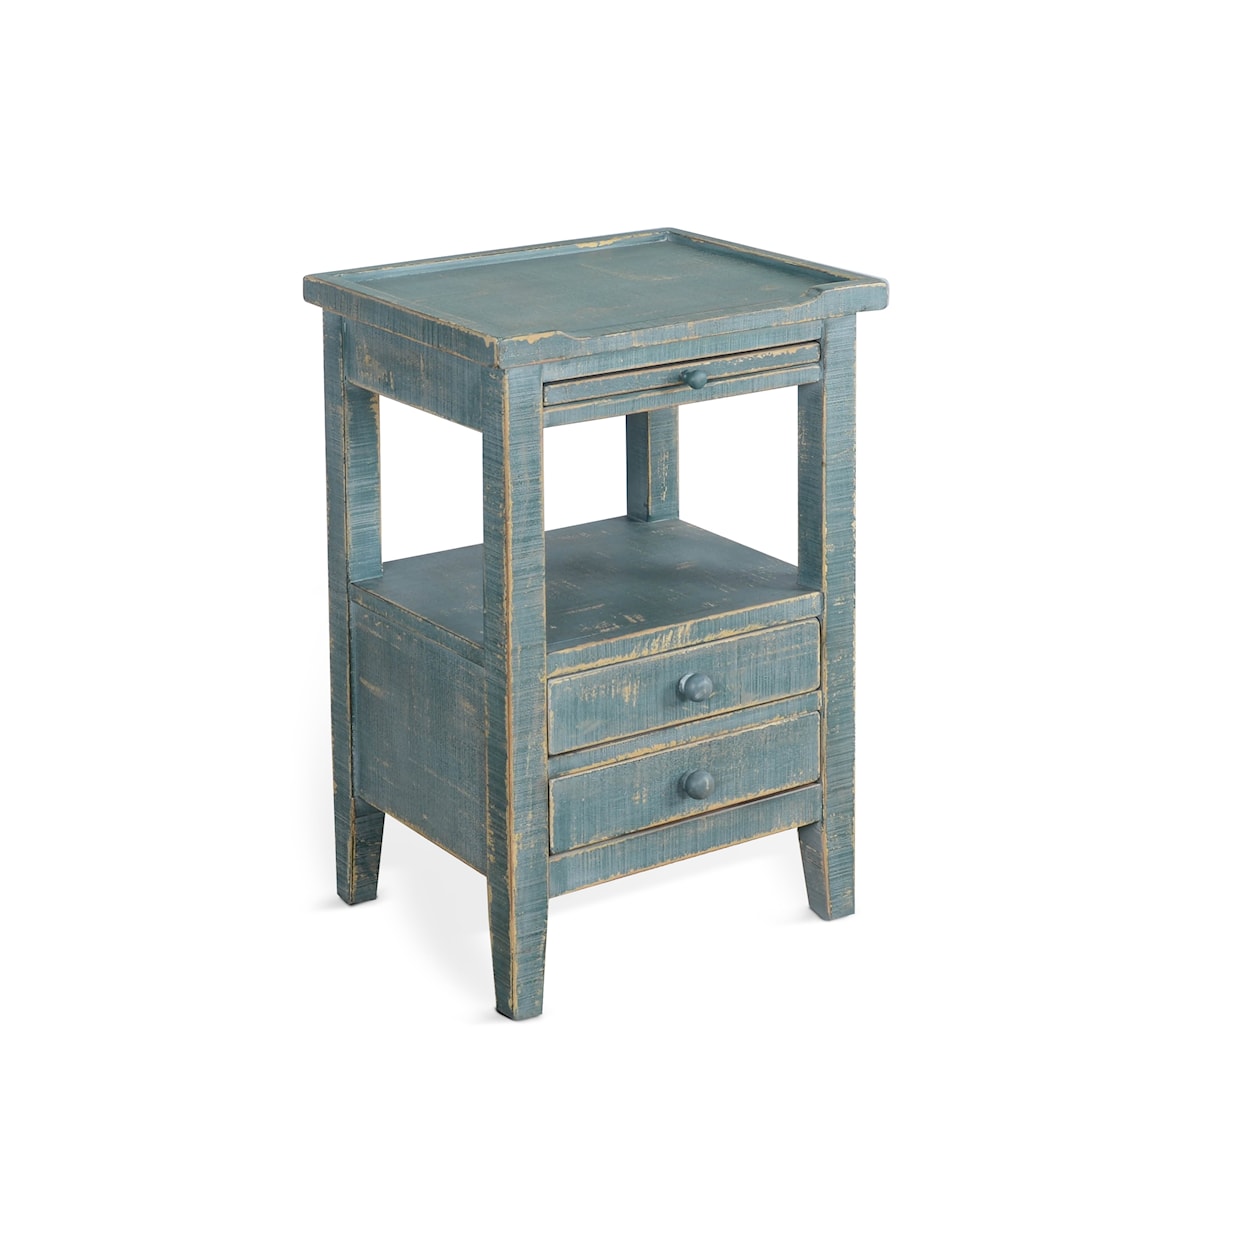 Sunny Designs Marina Side Table with Pullout Shelf